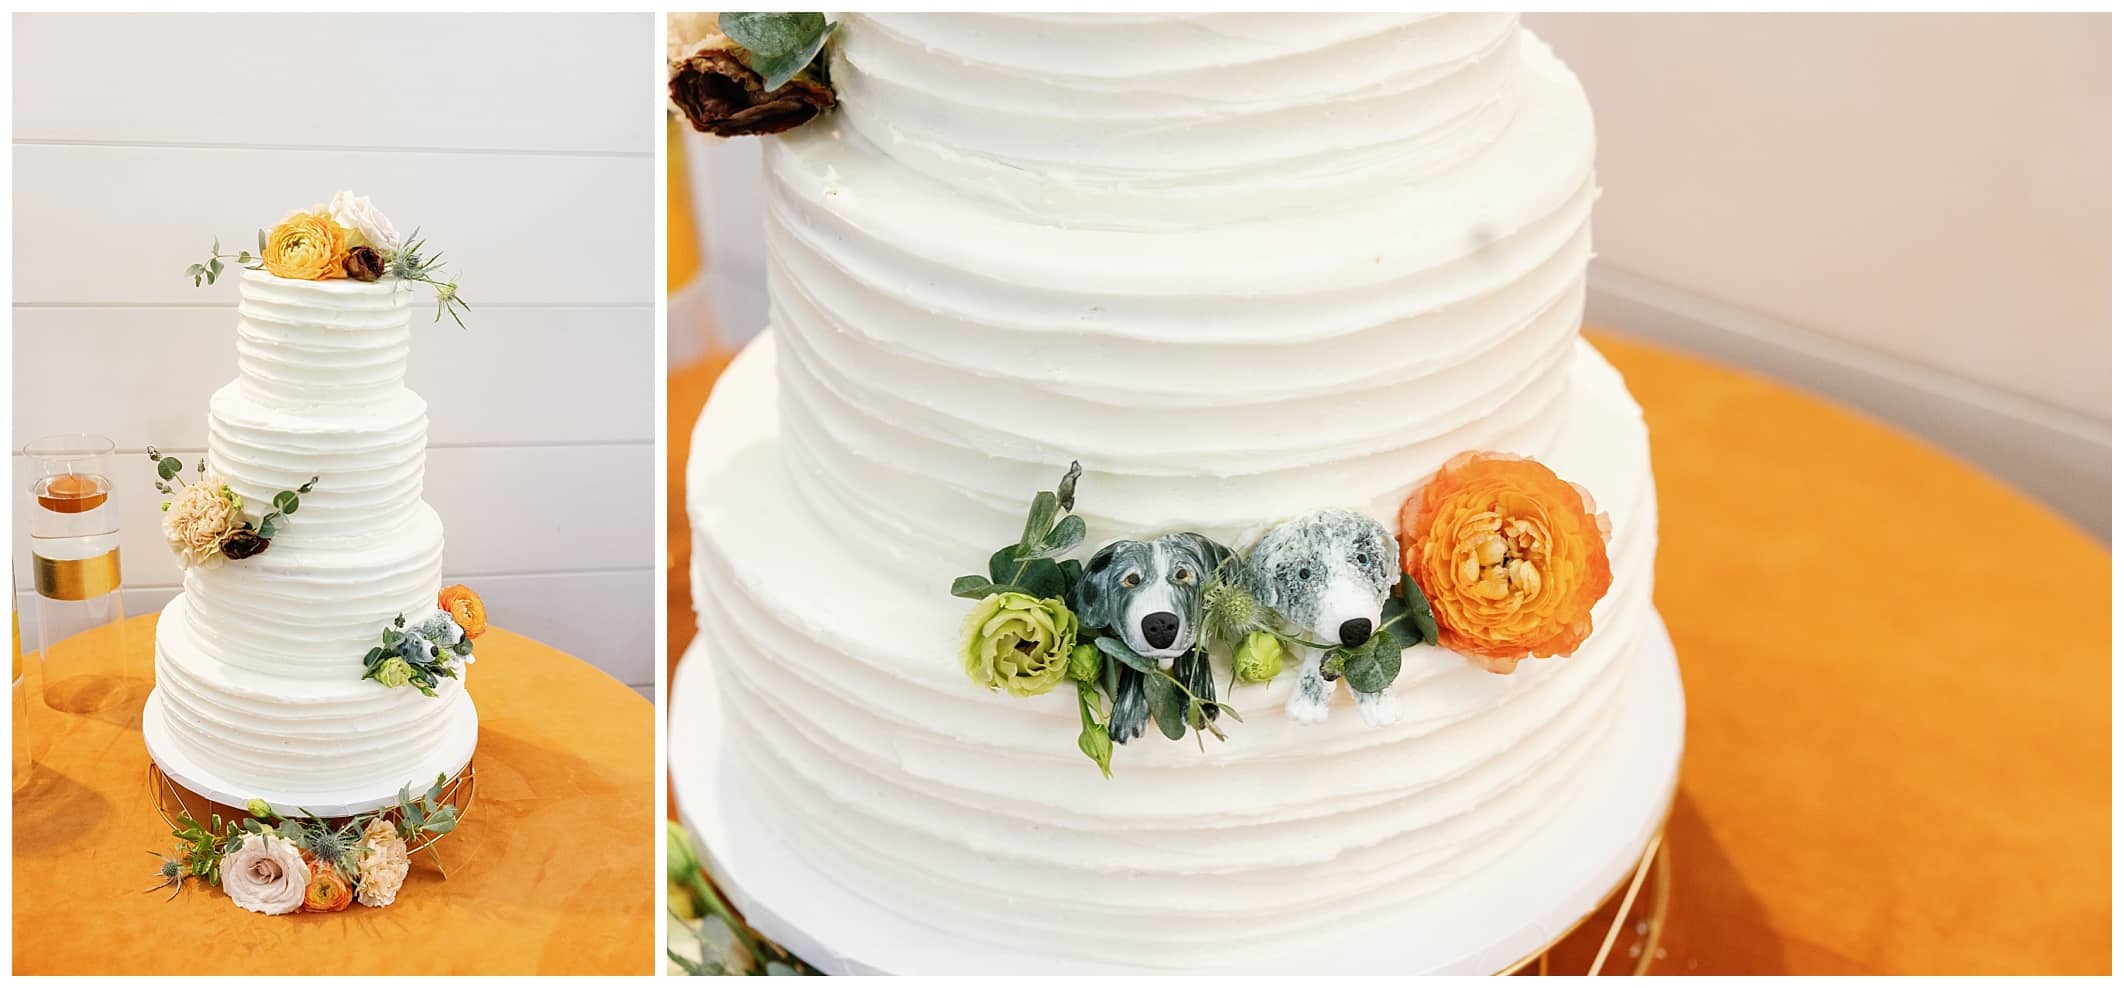 basic white wedding cake with orange table cloth and a few fall flowers with two dog figurines